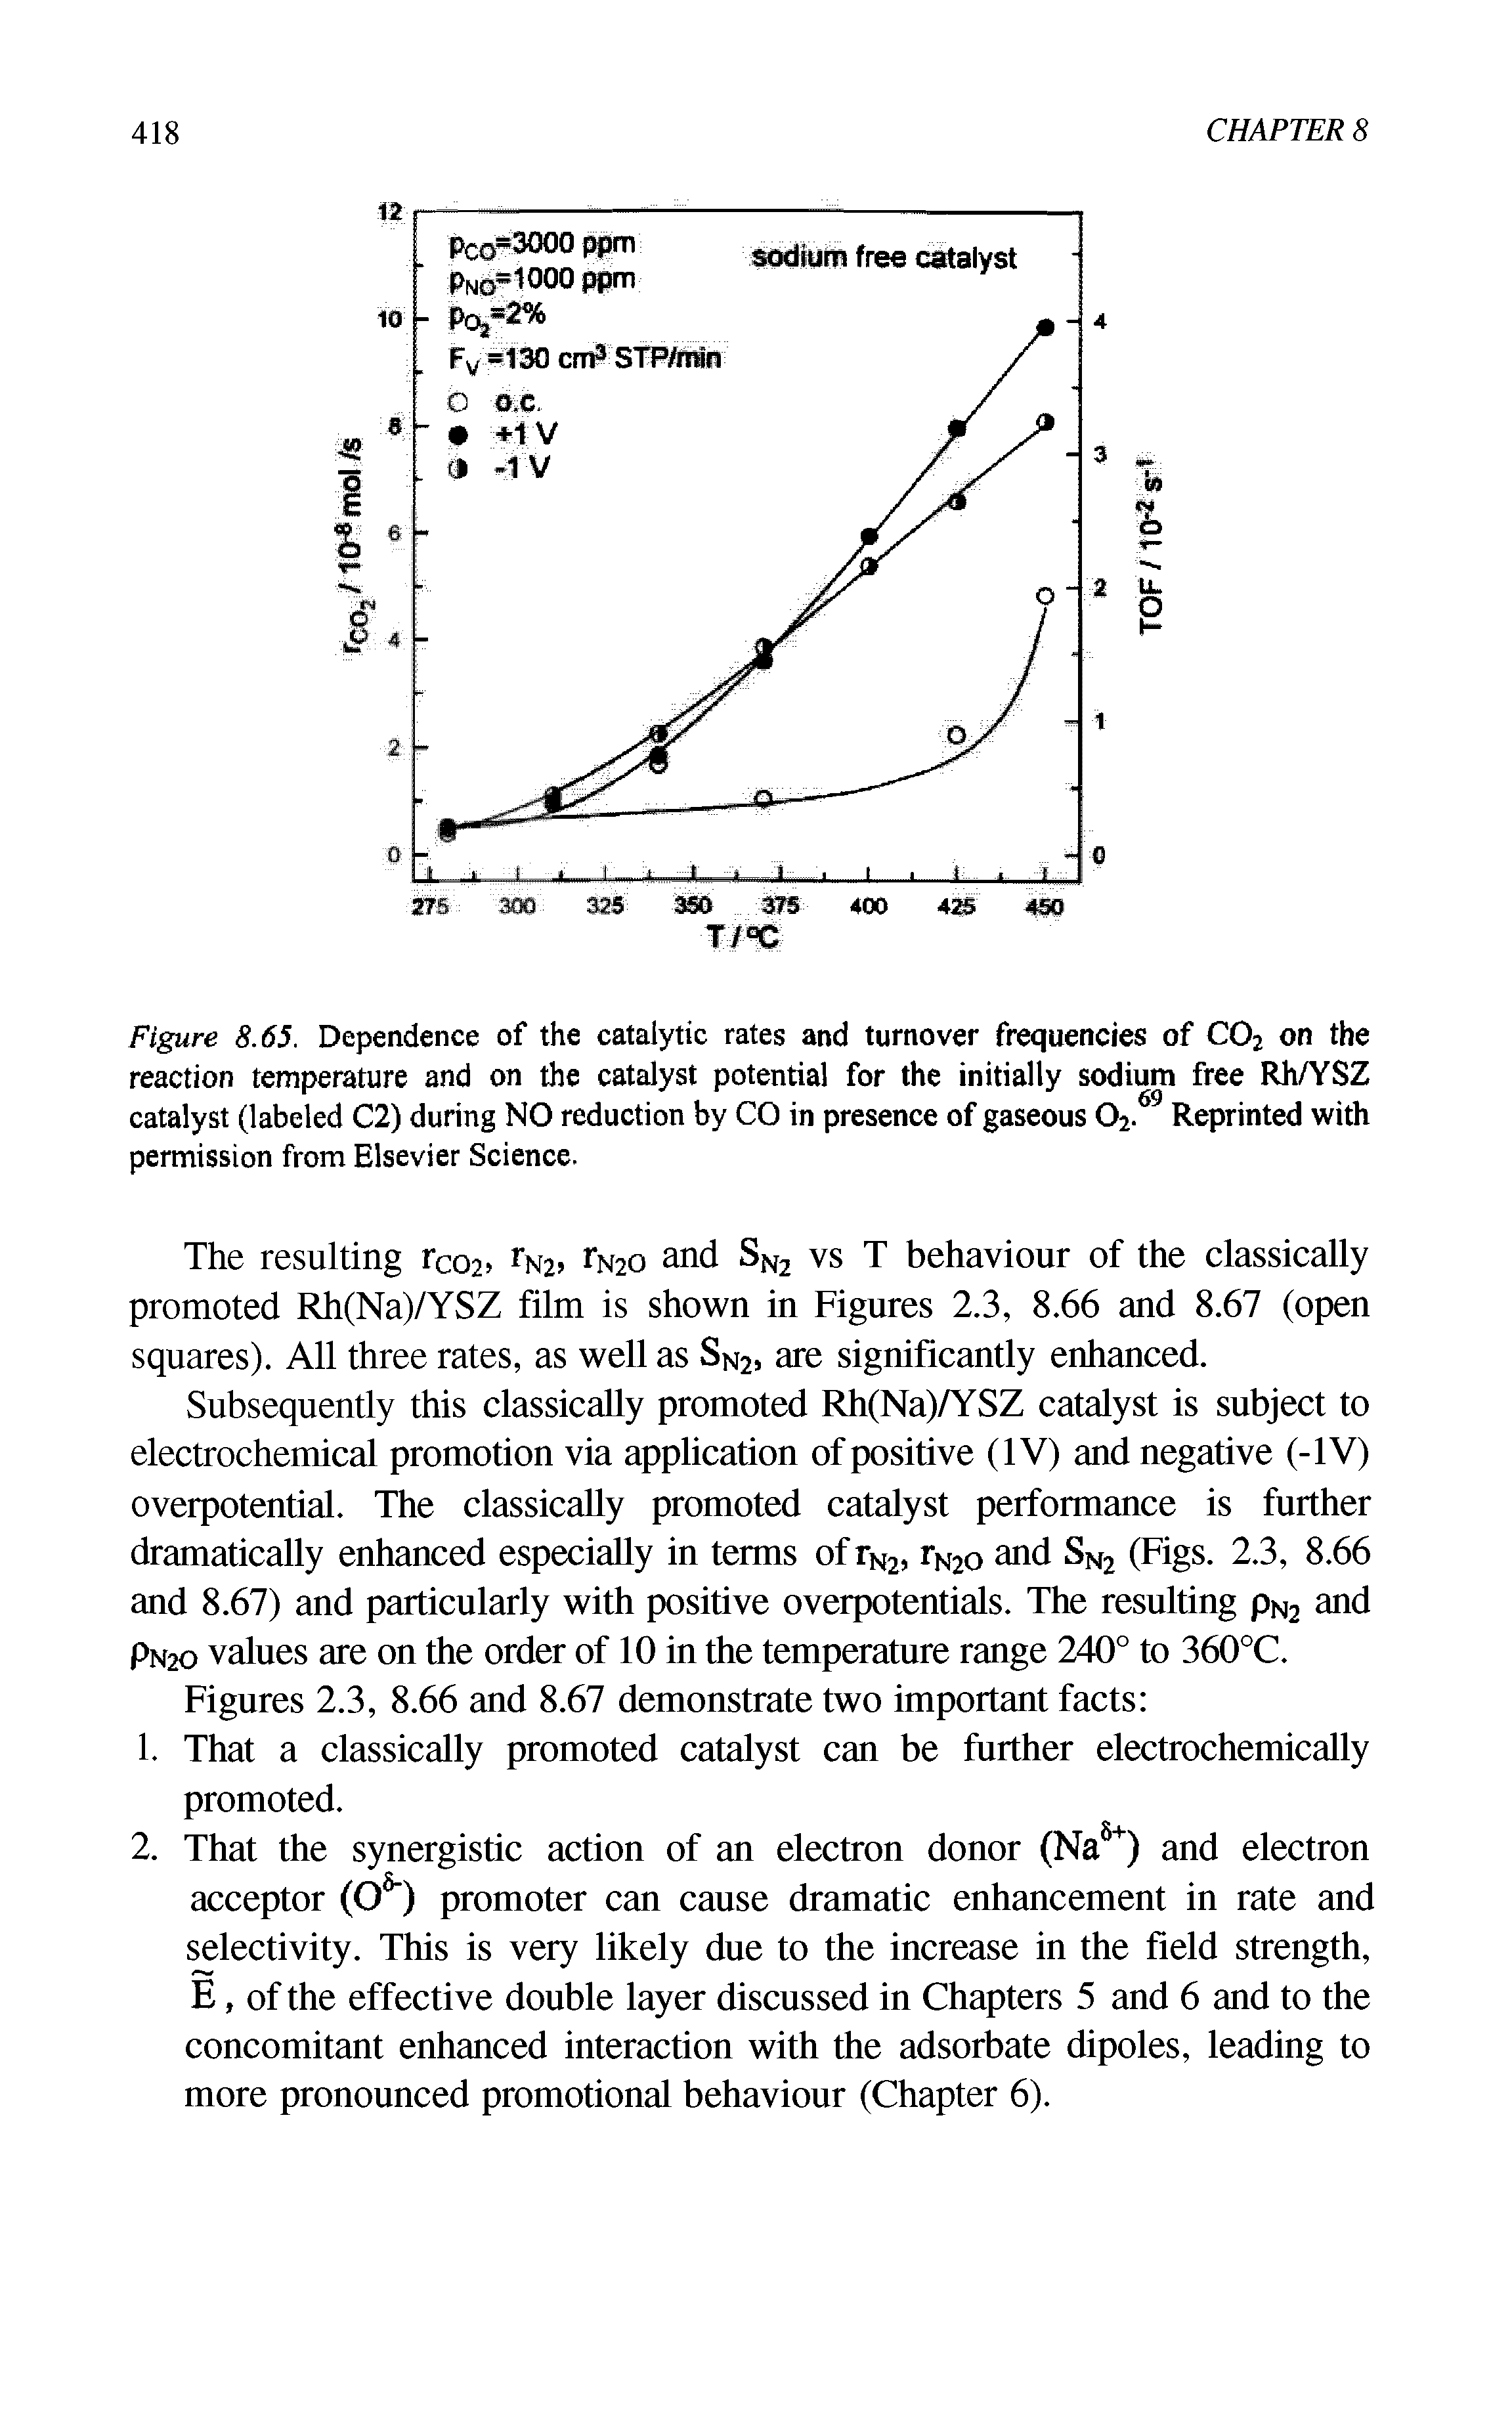 Figure 8.65. Dependence of the catalytic rates and turnover frequencies of C02 on the reaction temperature and on the catalyst potential for the initially sodium free Rh/YSZ catalyst (labeled C2) during NO reduction by CO in presence of gaseous 02. Reprinted with permission from Elsevier Science.